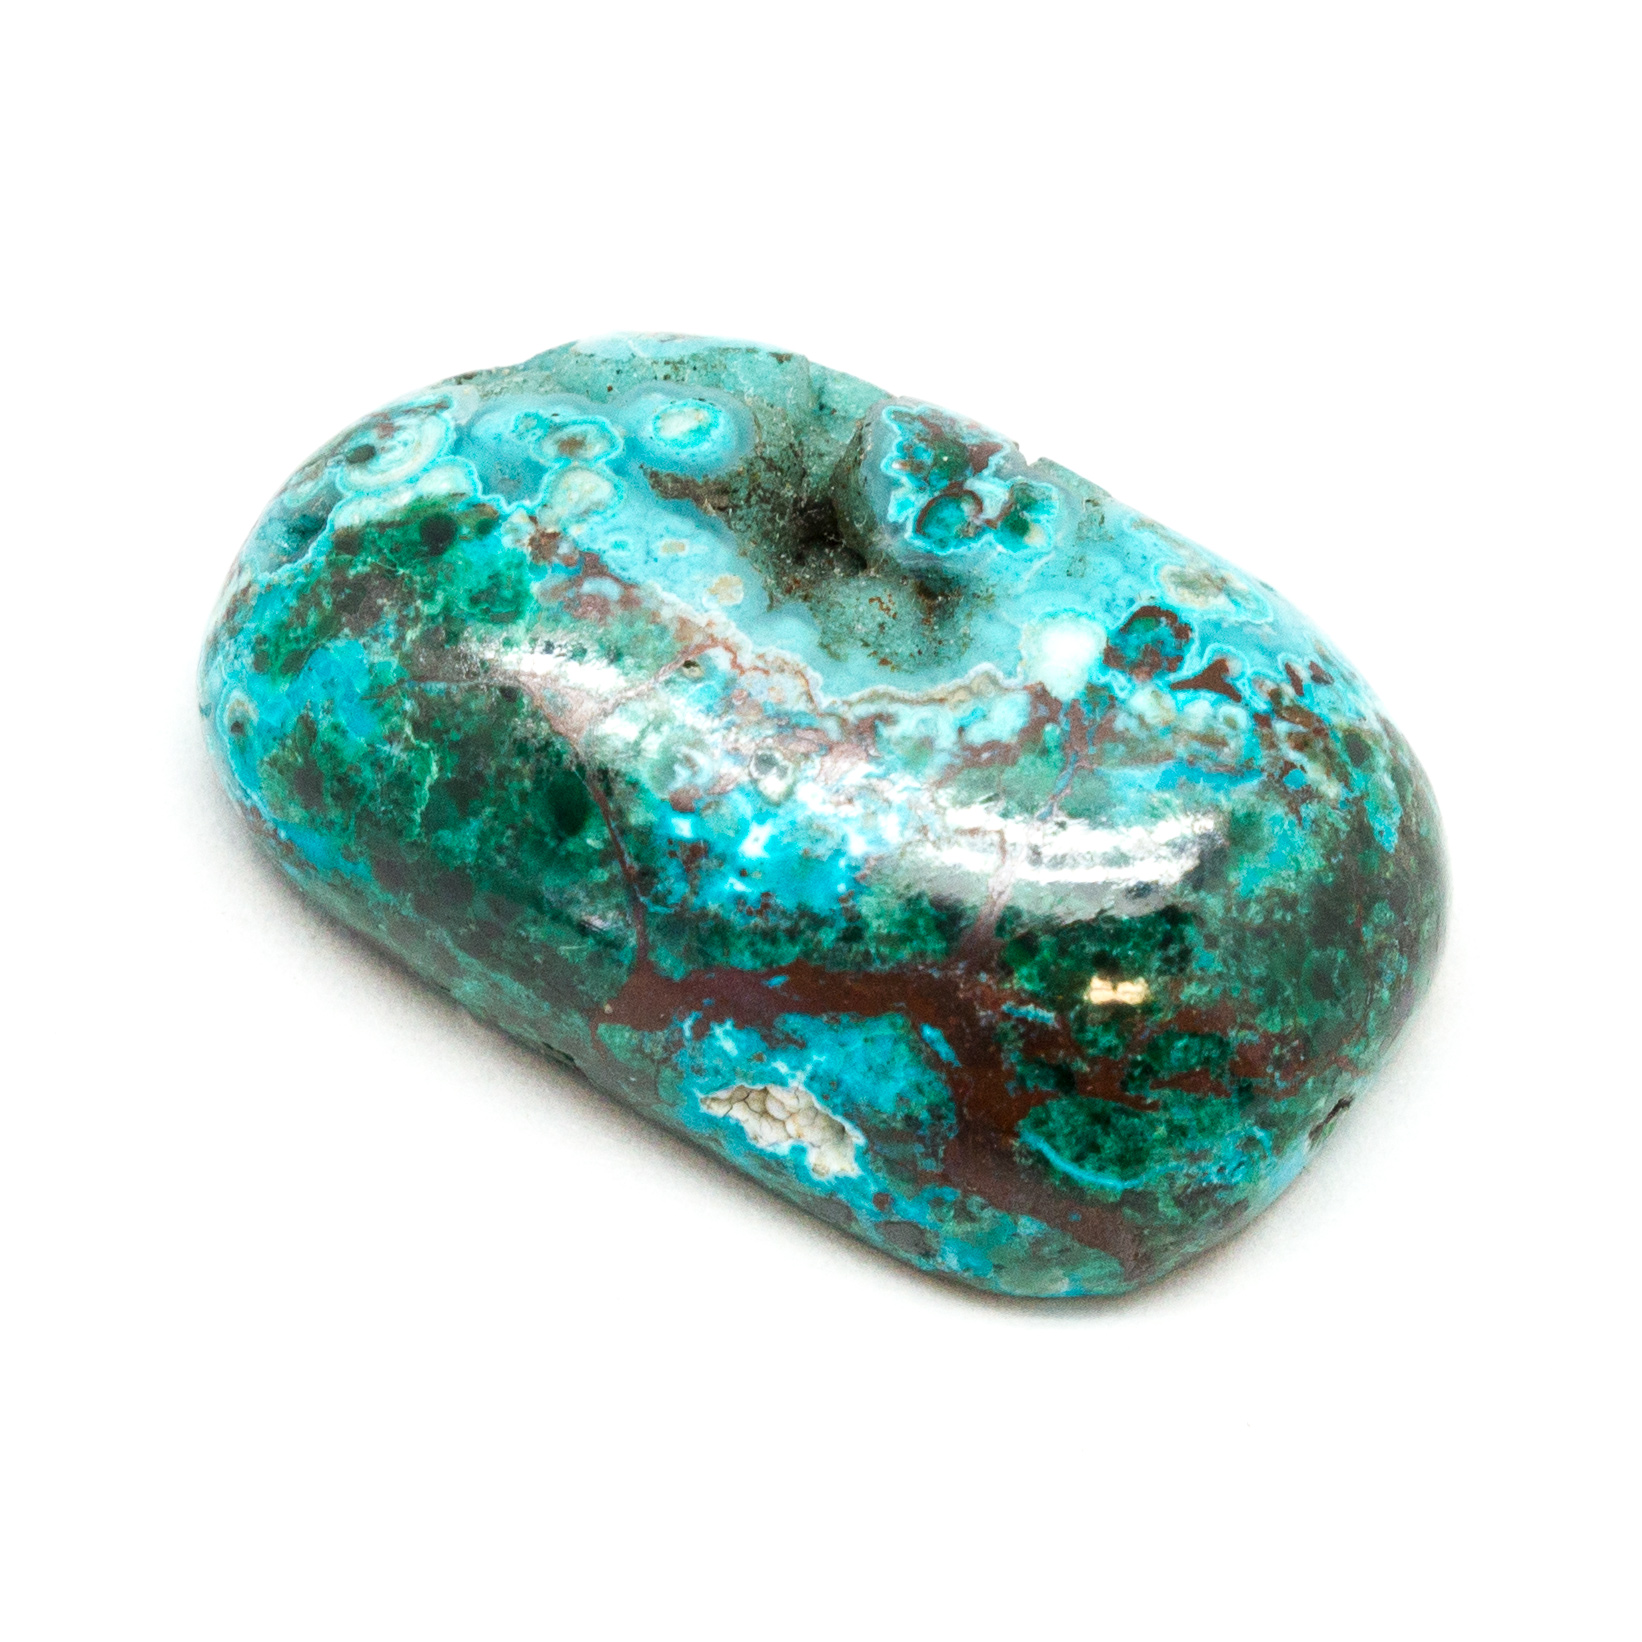 47X27X7 mm SG-32 Dazzling Top Grade Quality 100/% Natural Chrysocolla Malachite Fancy Shape Cabochon Loose Gemstone For Making Jewelry 97 Ct